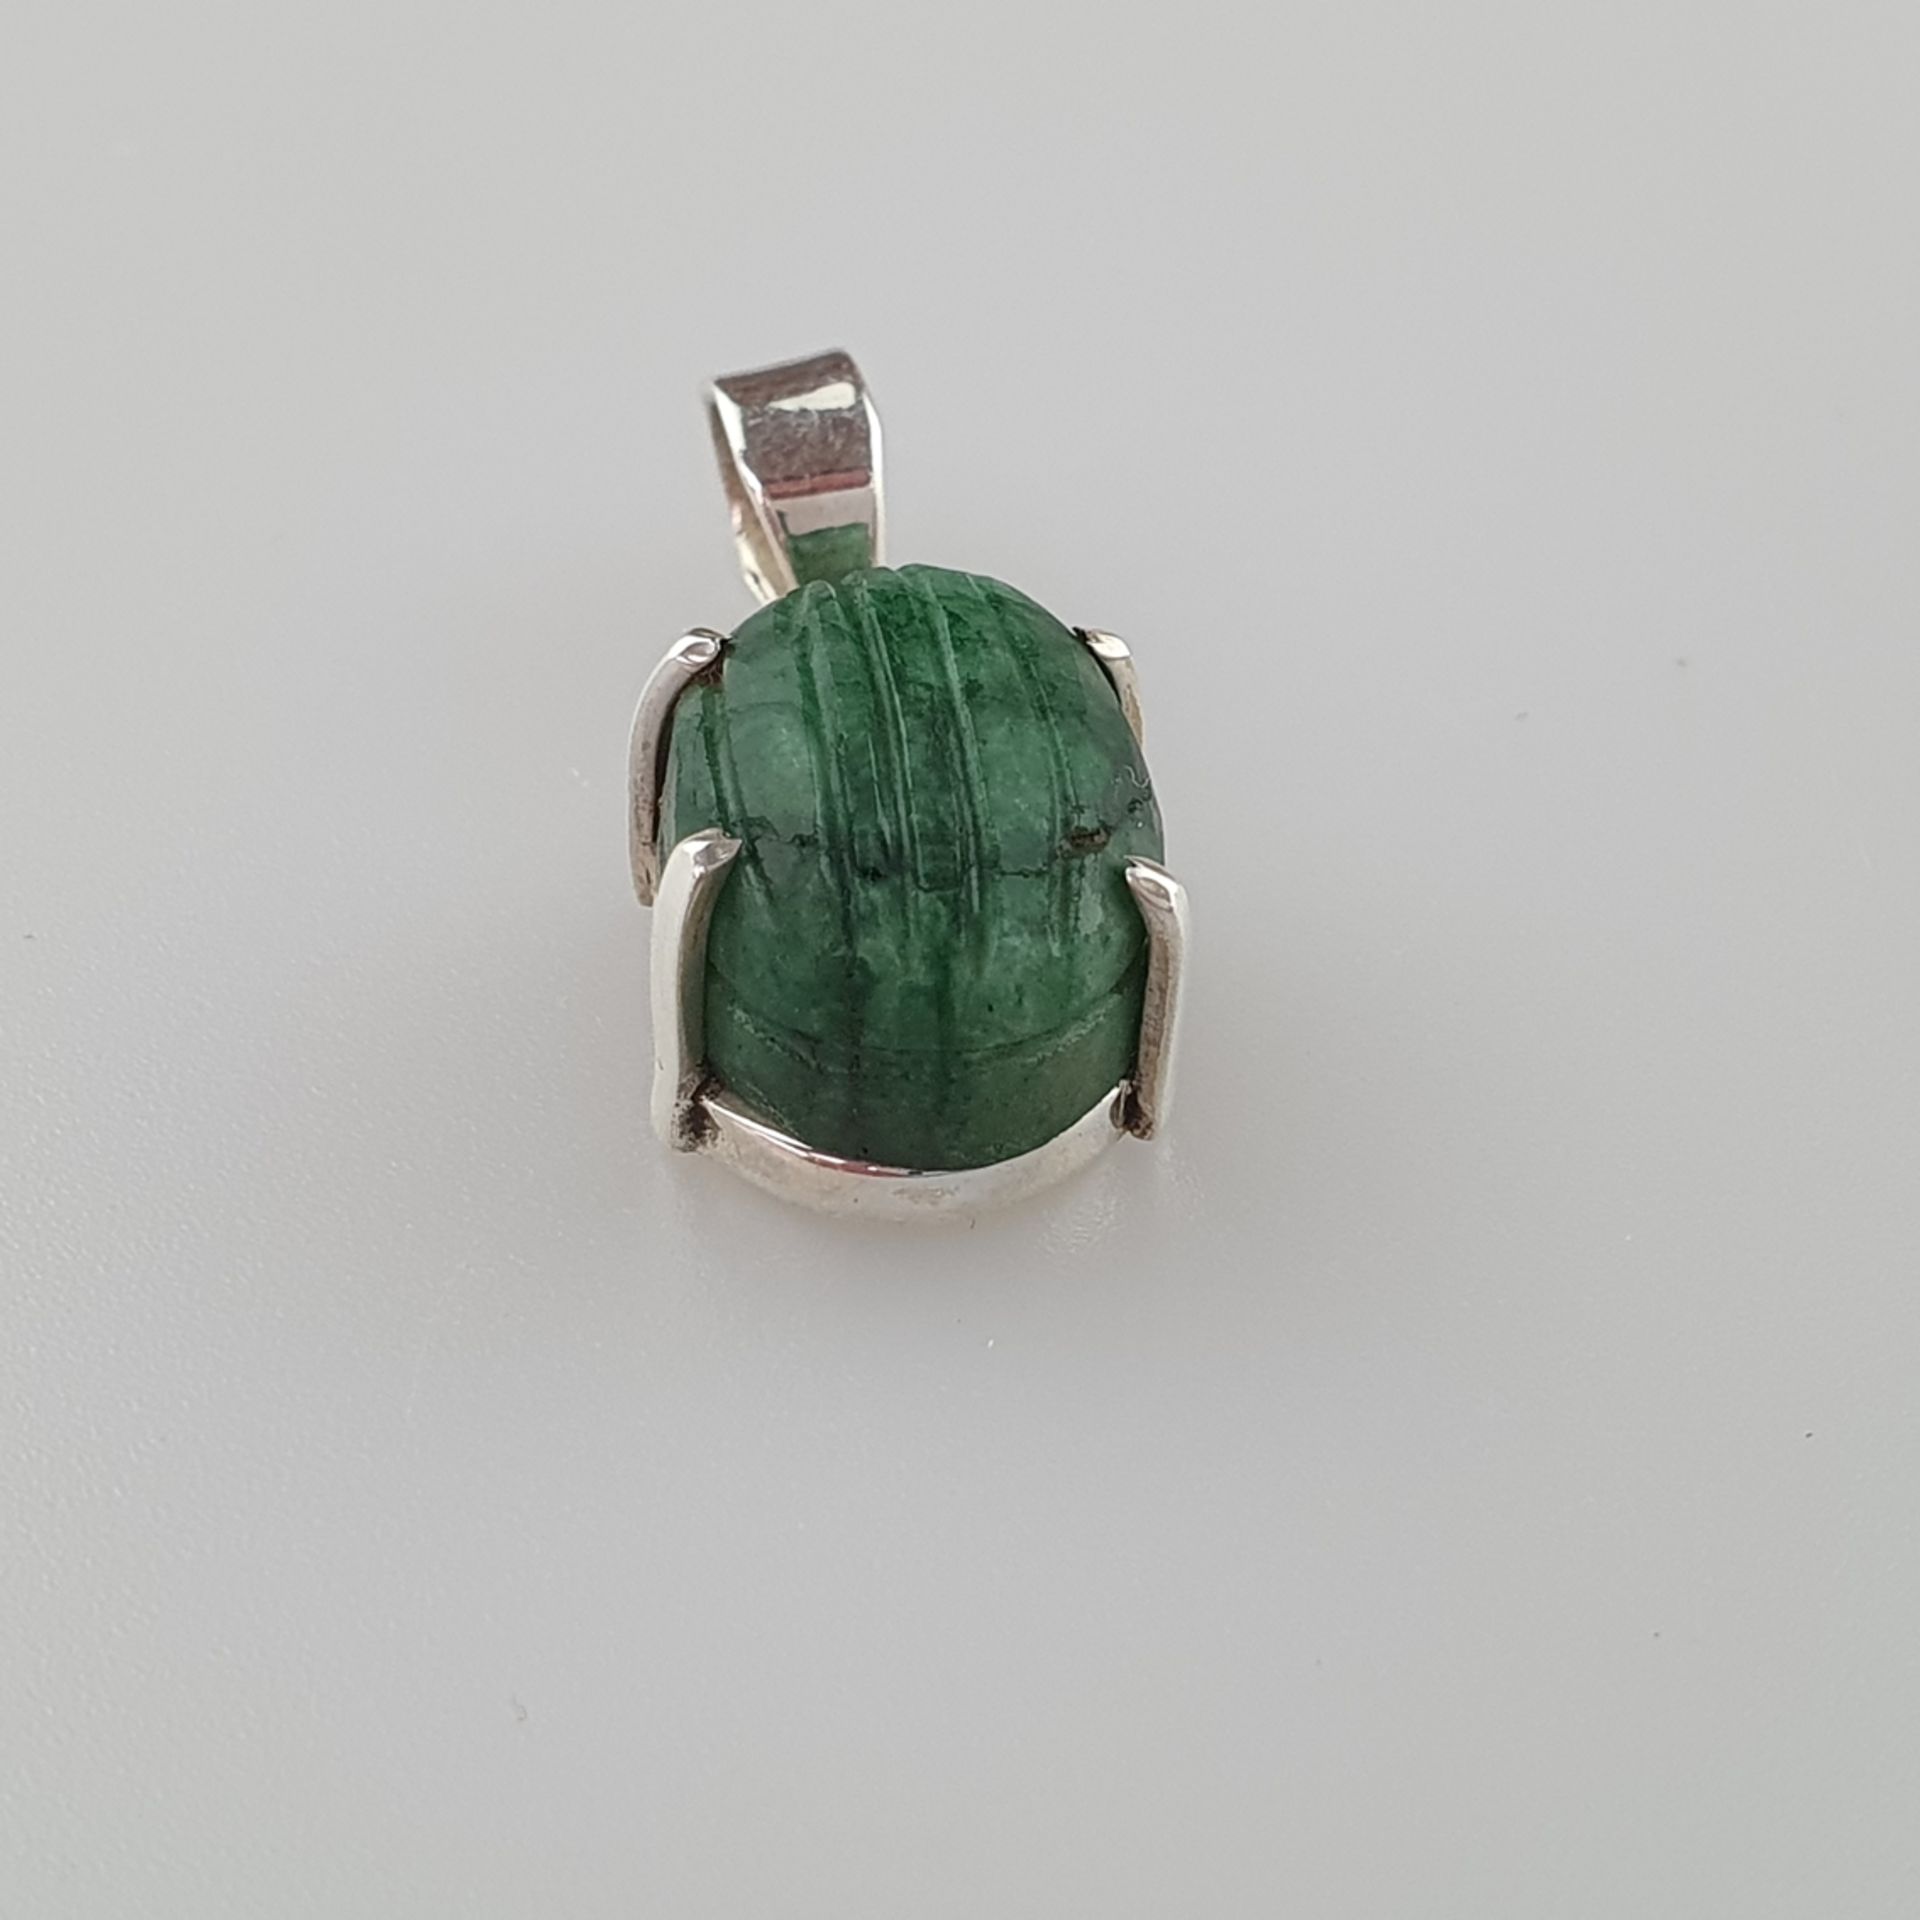 925 Silver Pendant with a Carved Emerald of 14ct, ca. 5,0g, total measurements: ca. 22 x 12,5 mm - Image 2 of 4